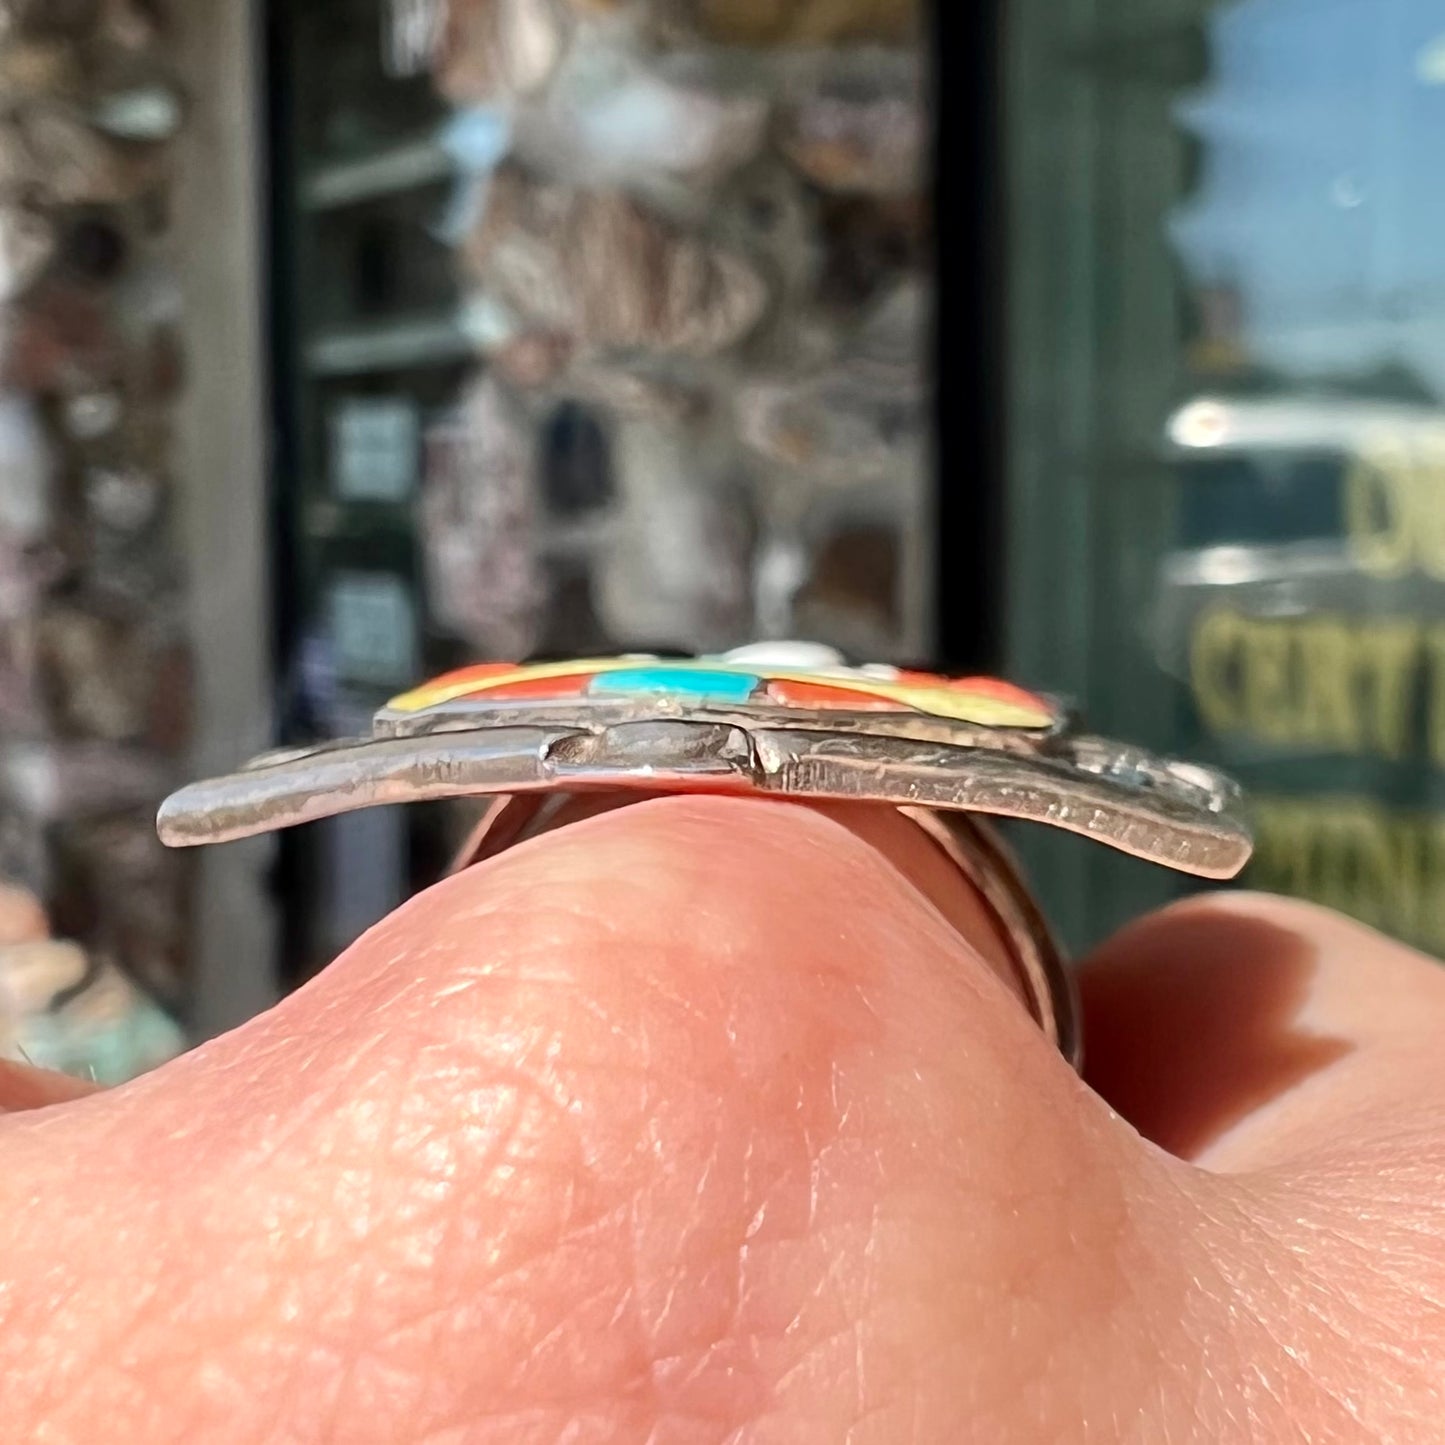 A sterling silver ring handmade in the motif of a Zuni Indian horned kachina set with onyx, turquoise, coral, mother of pearl, and sulfur quartz stones.